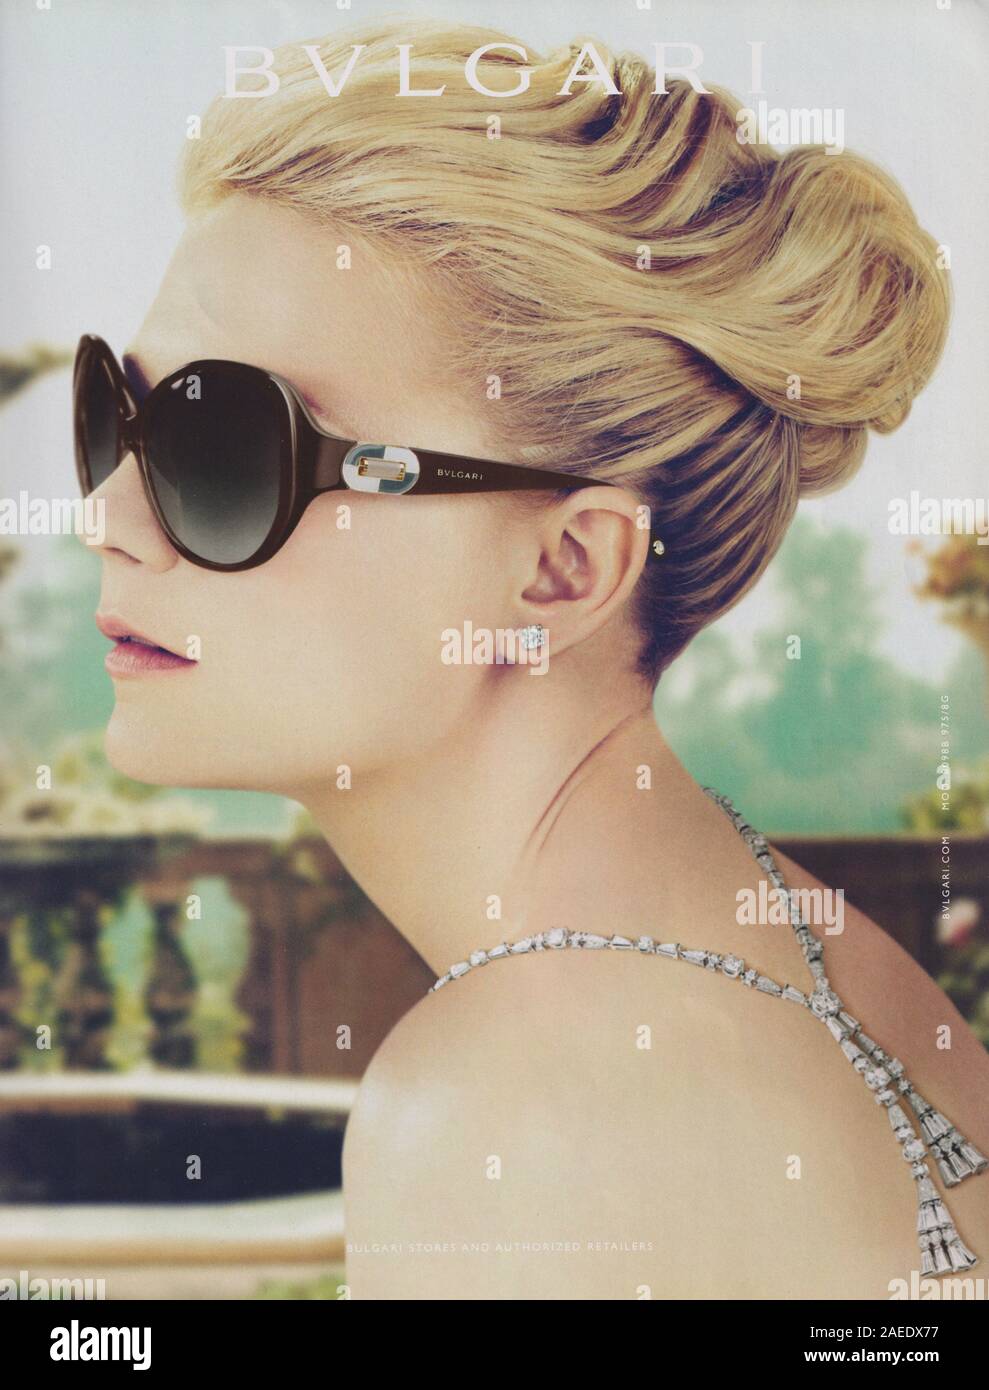 poster advertising BVLGARI fashion house with Kirsten Dunst in paper magazine from 2012 year, advertisement, creative Bulgari advert from 2010s Stock Photo